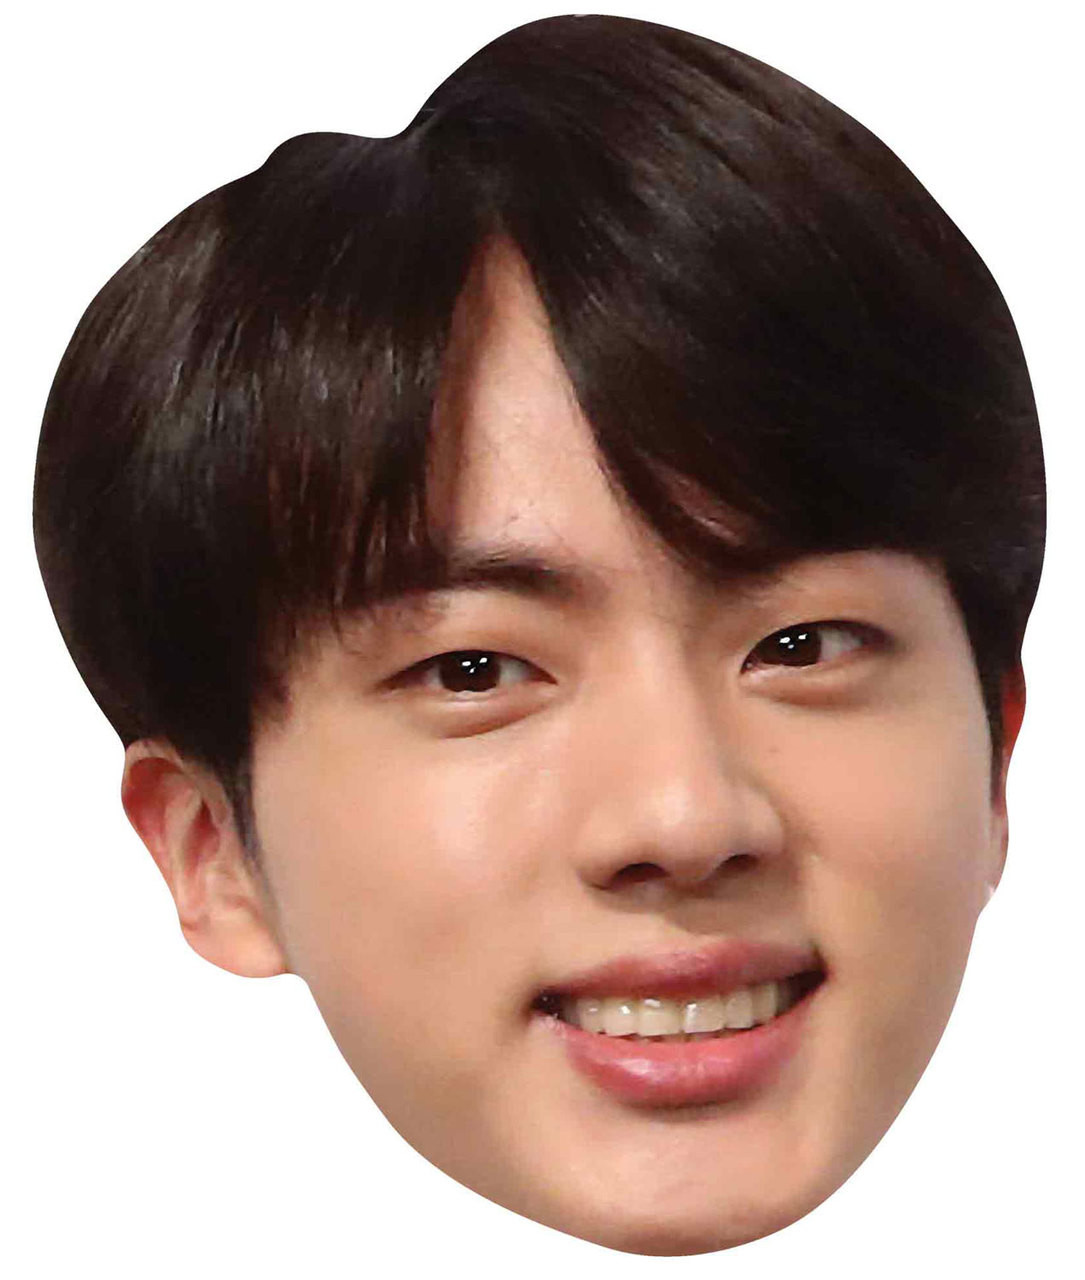 BTS with faces mask